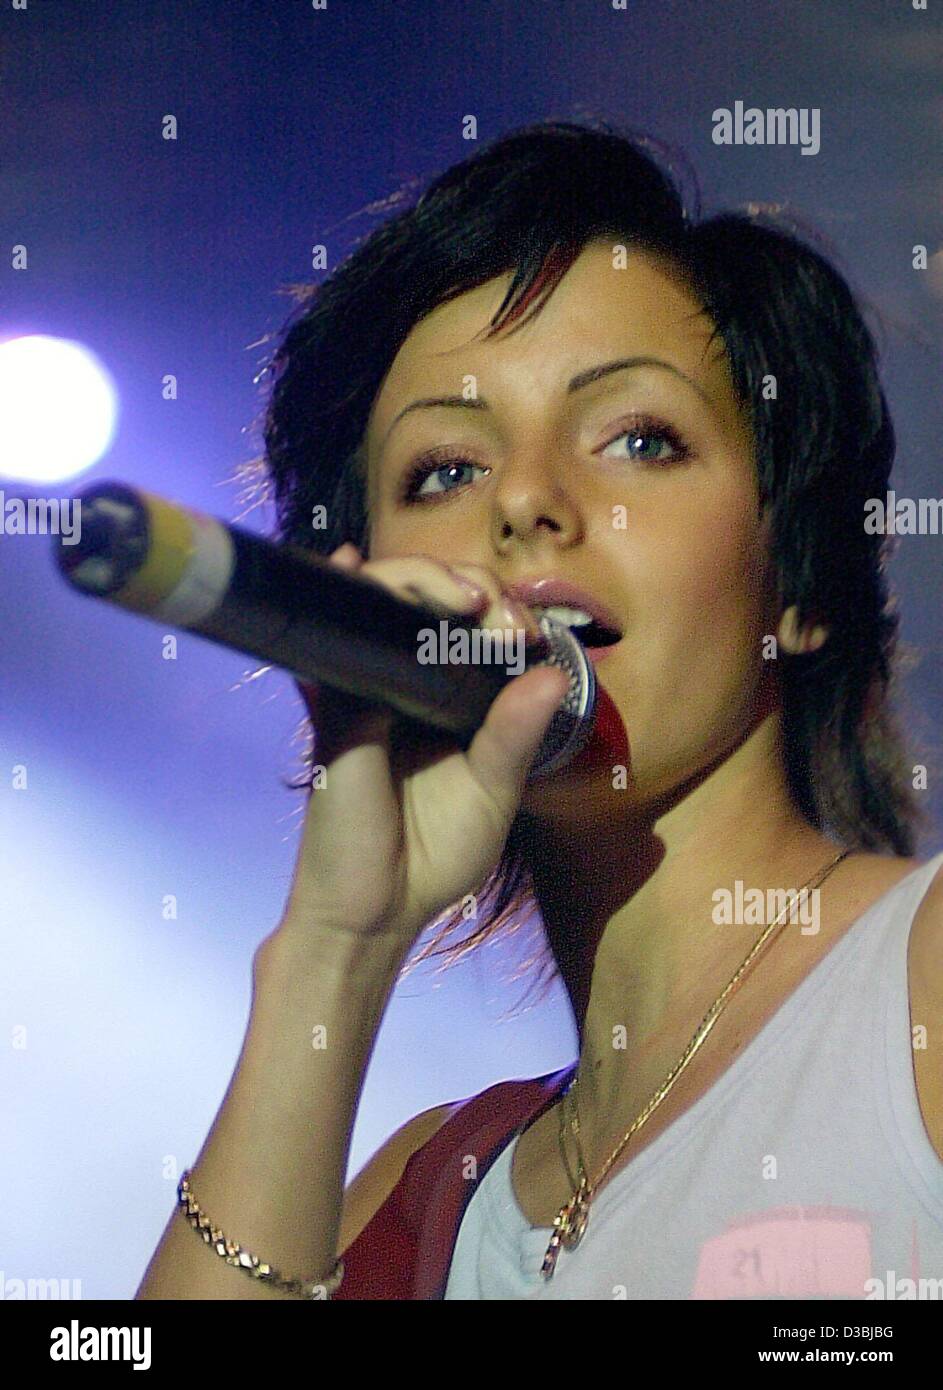 dpa) - Singer Lena Volkova of the Russian pop duo t.A.t.U., pictured at her  first concert in Germany, Saarbruecken, 27 May 2003. Further concerts in  Germany were cancelled due to the girl